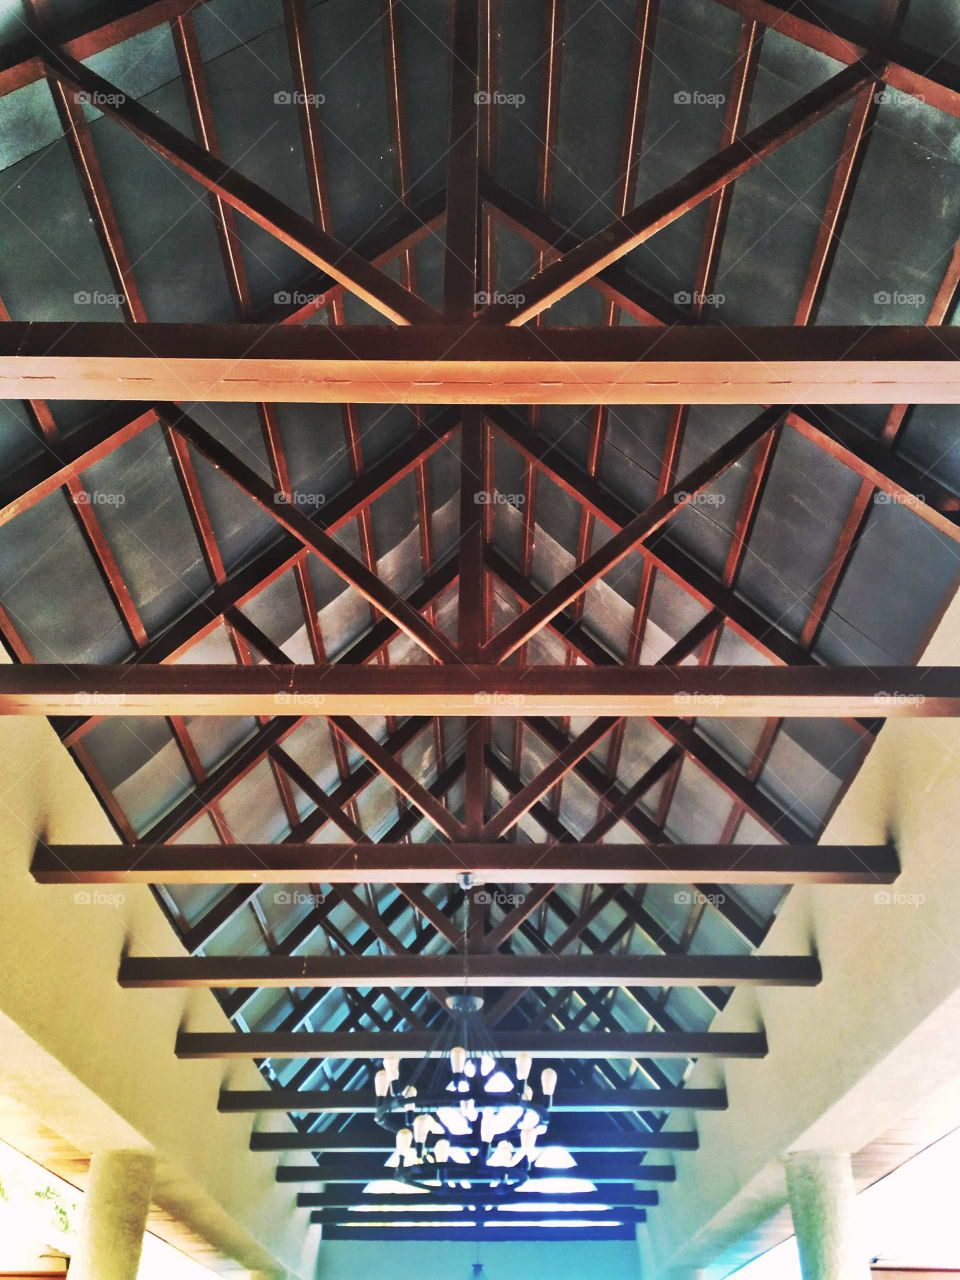 An abstract ceiling made of woods. Instagram: shafiggue.k